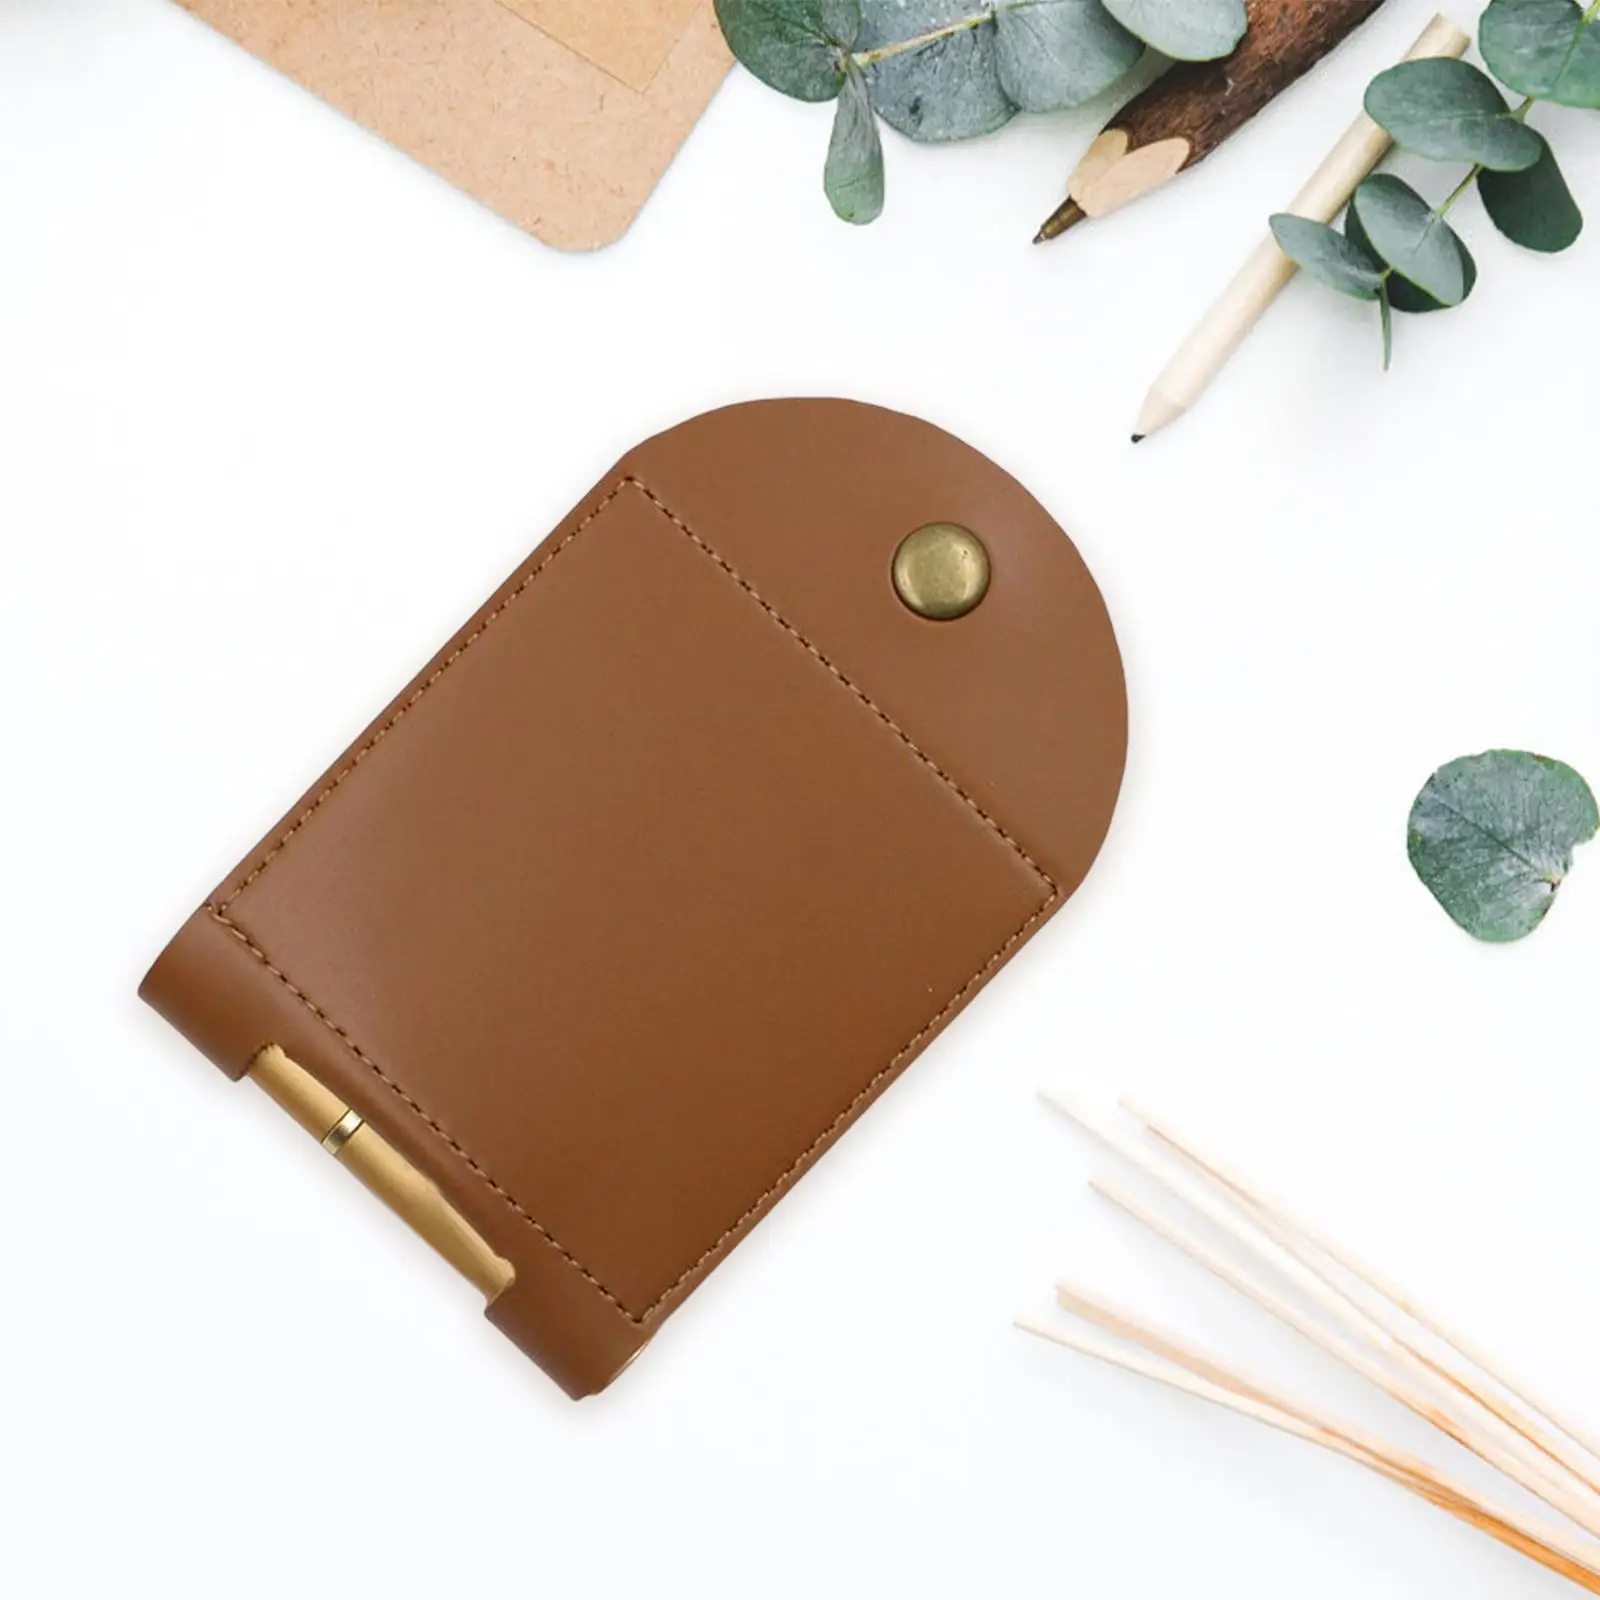 PU Leather Playing Card Case Holder Small Size Fits and Bridge Size Cards Multiple Functions Comfortable Daily Use